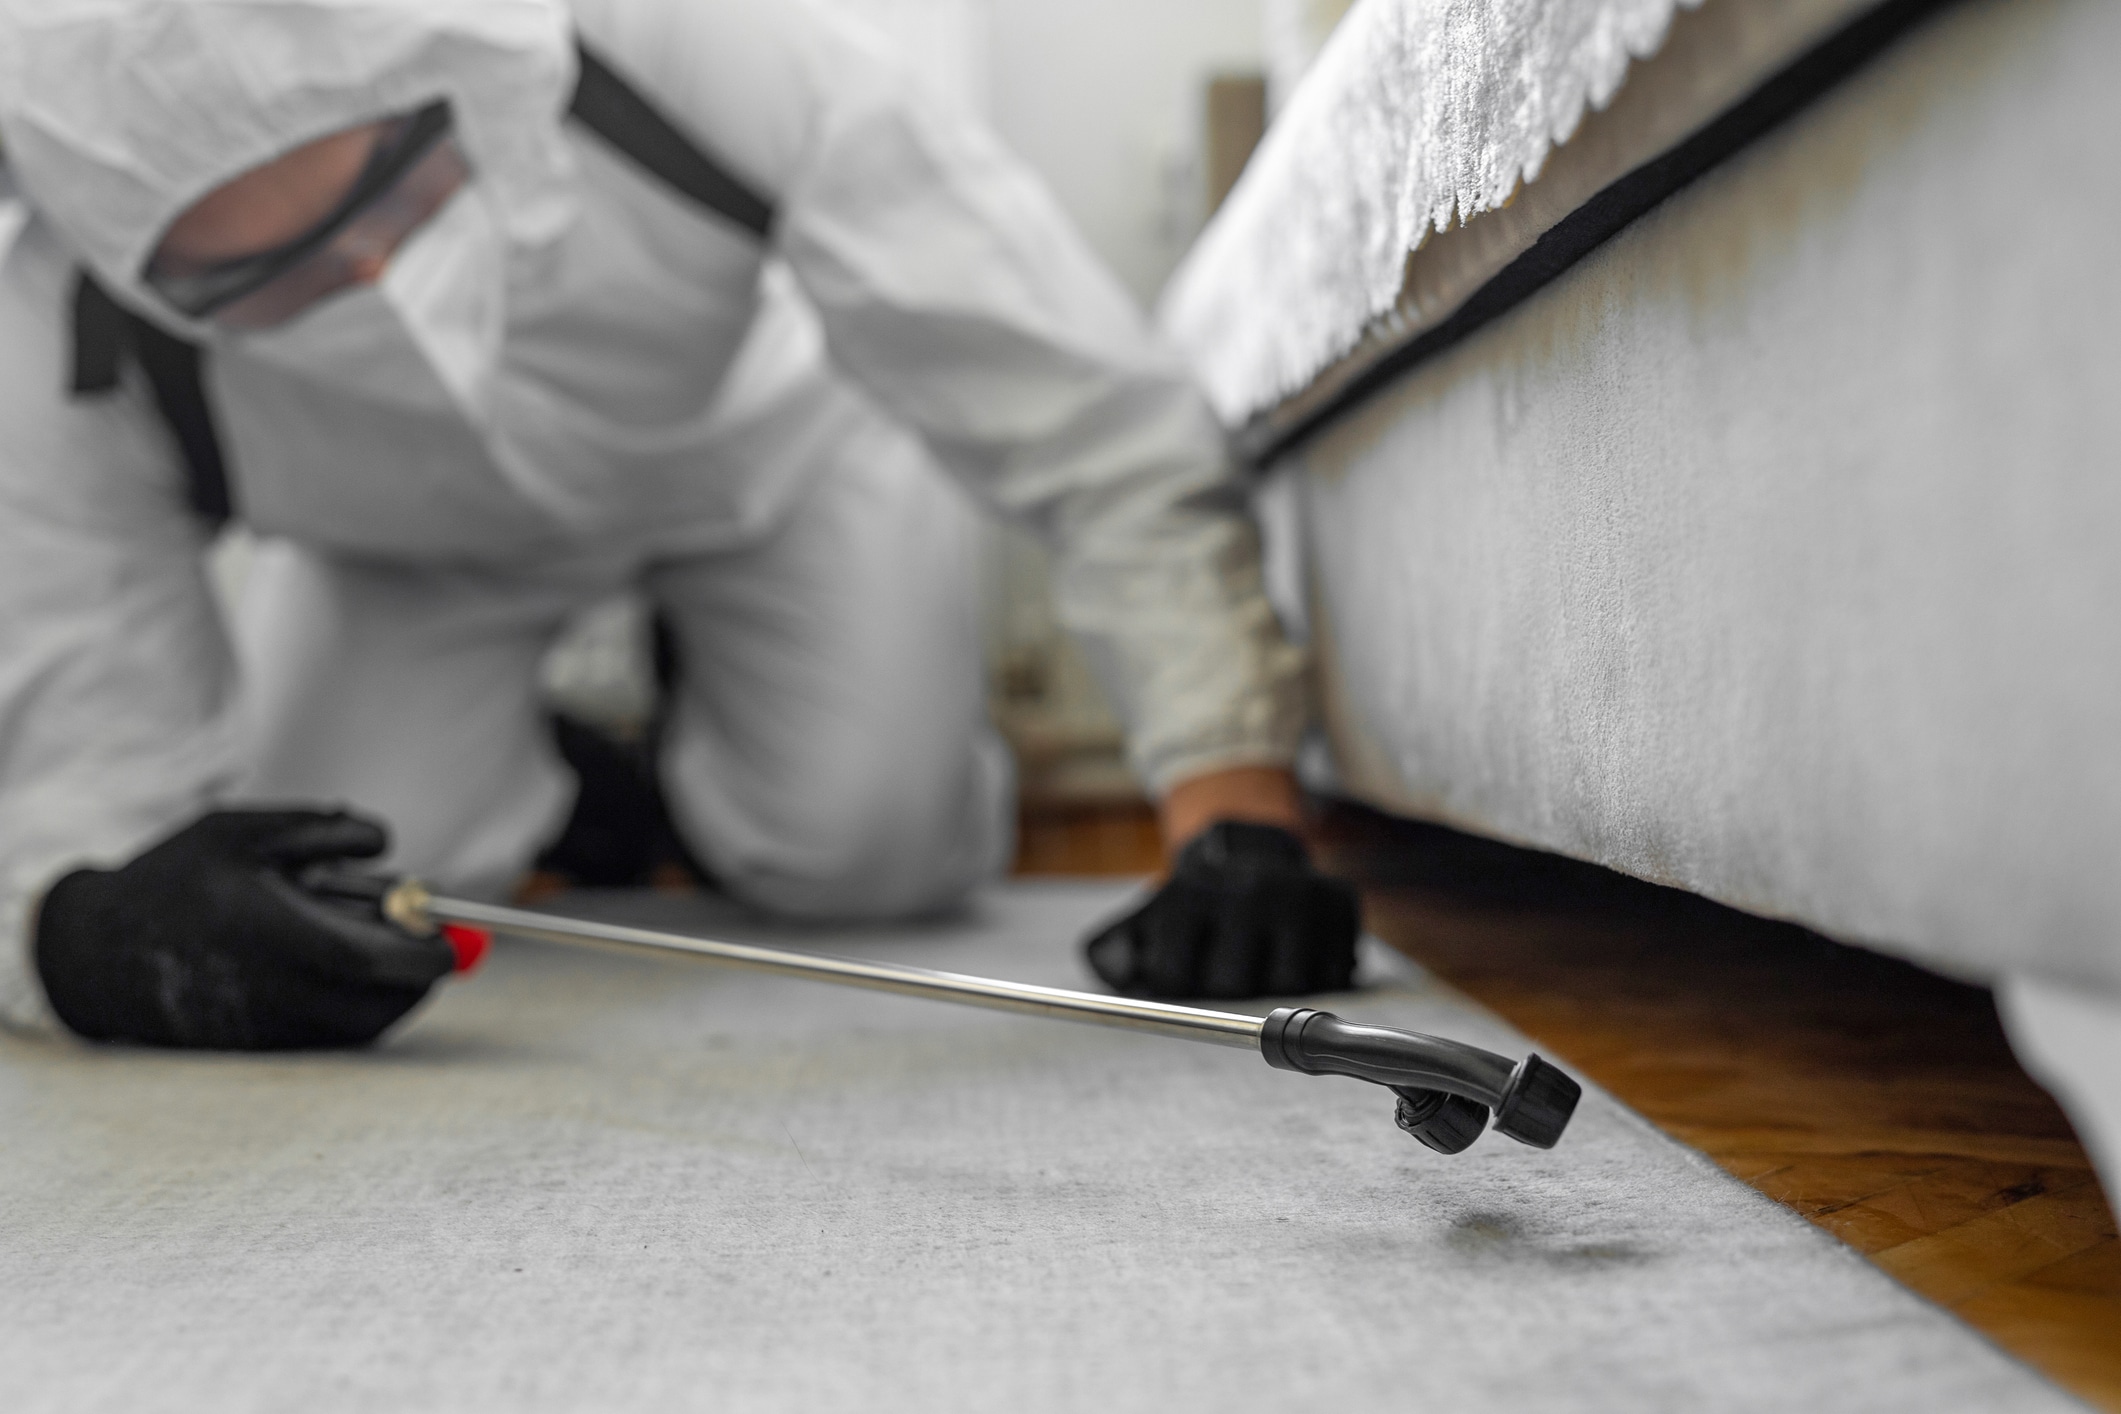 An image of a person in a white hazmat suit, holding the nozzle of a tank sprayer under the edge of a bed.